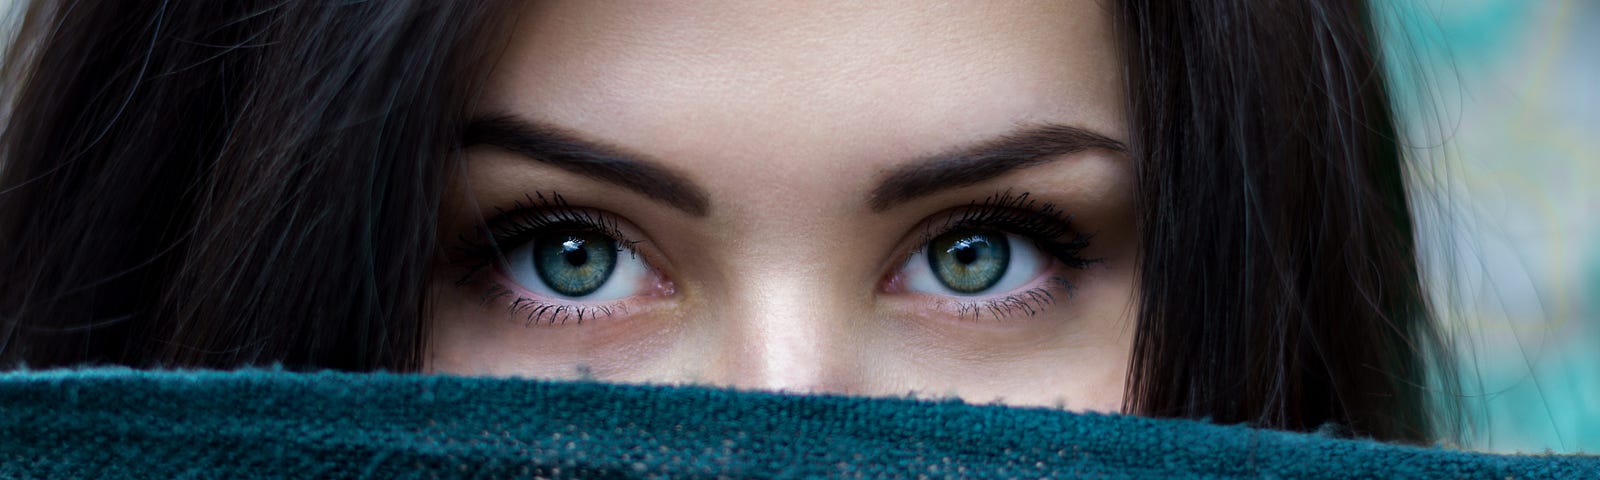 Woman peering over turquoise cloth